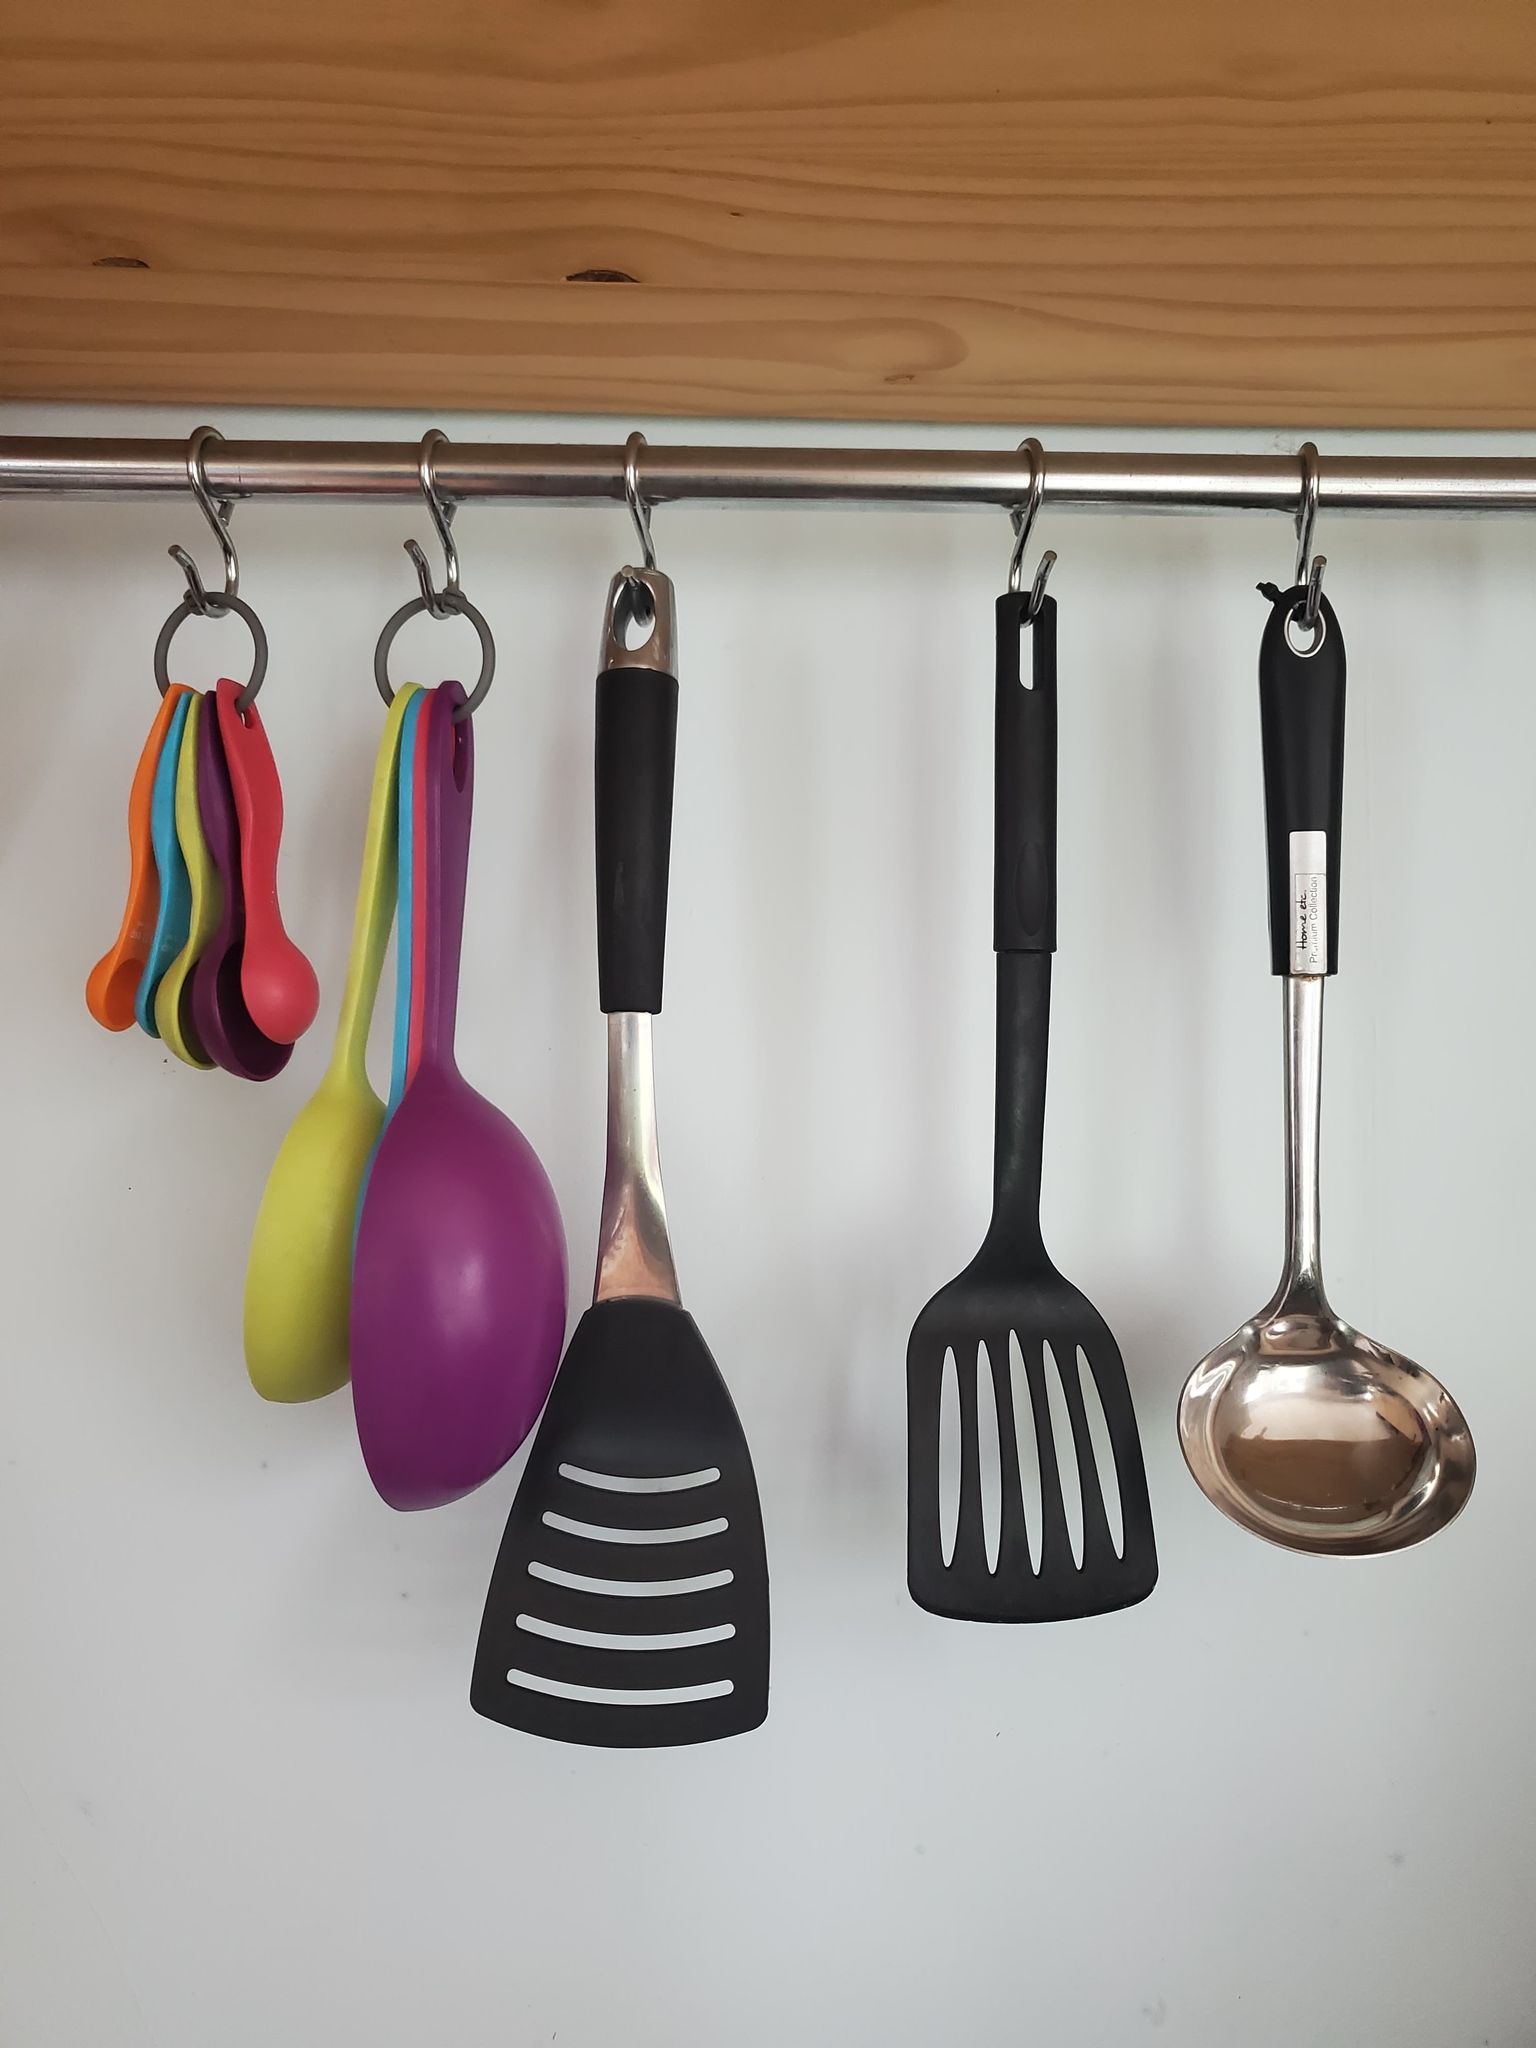 measuring spoons and kitchen tools hanging on metal bar